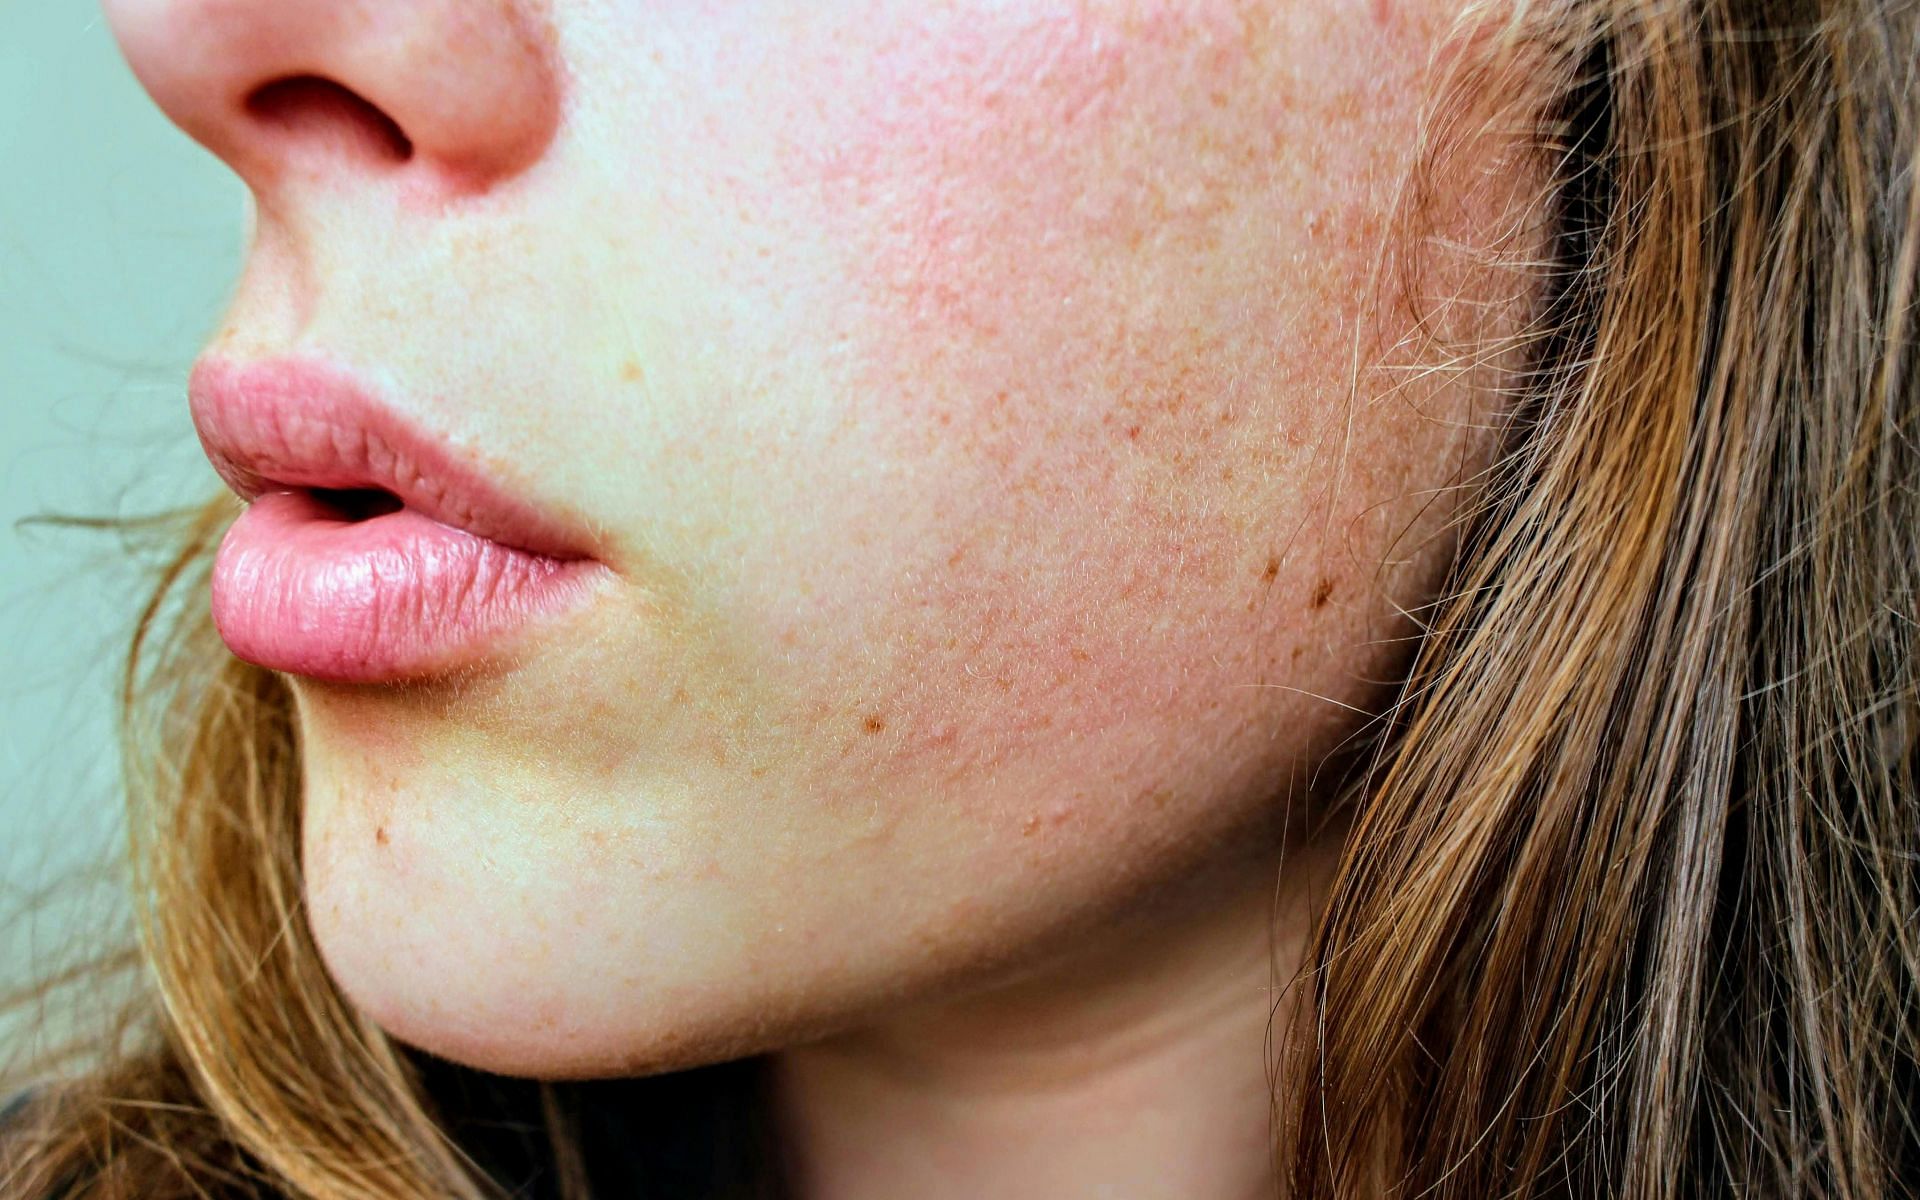 Importance of healthy skin (image sourced via Pexels / Photo by Jenna)